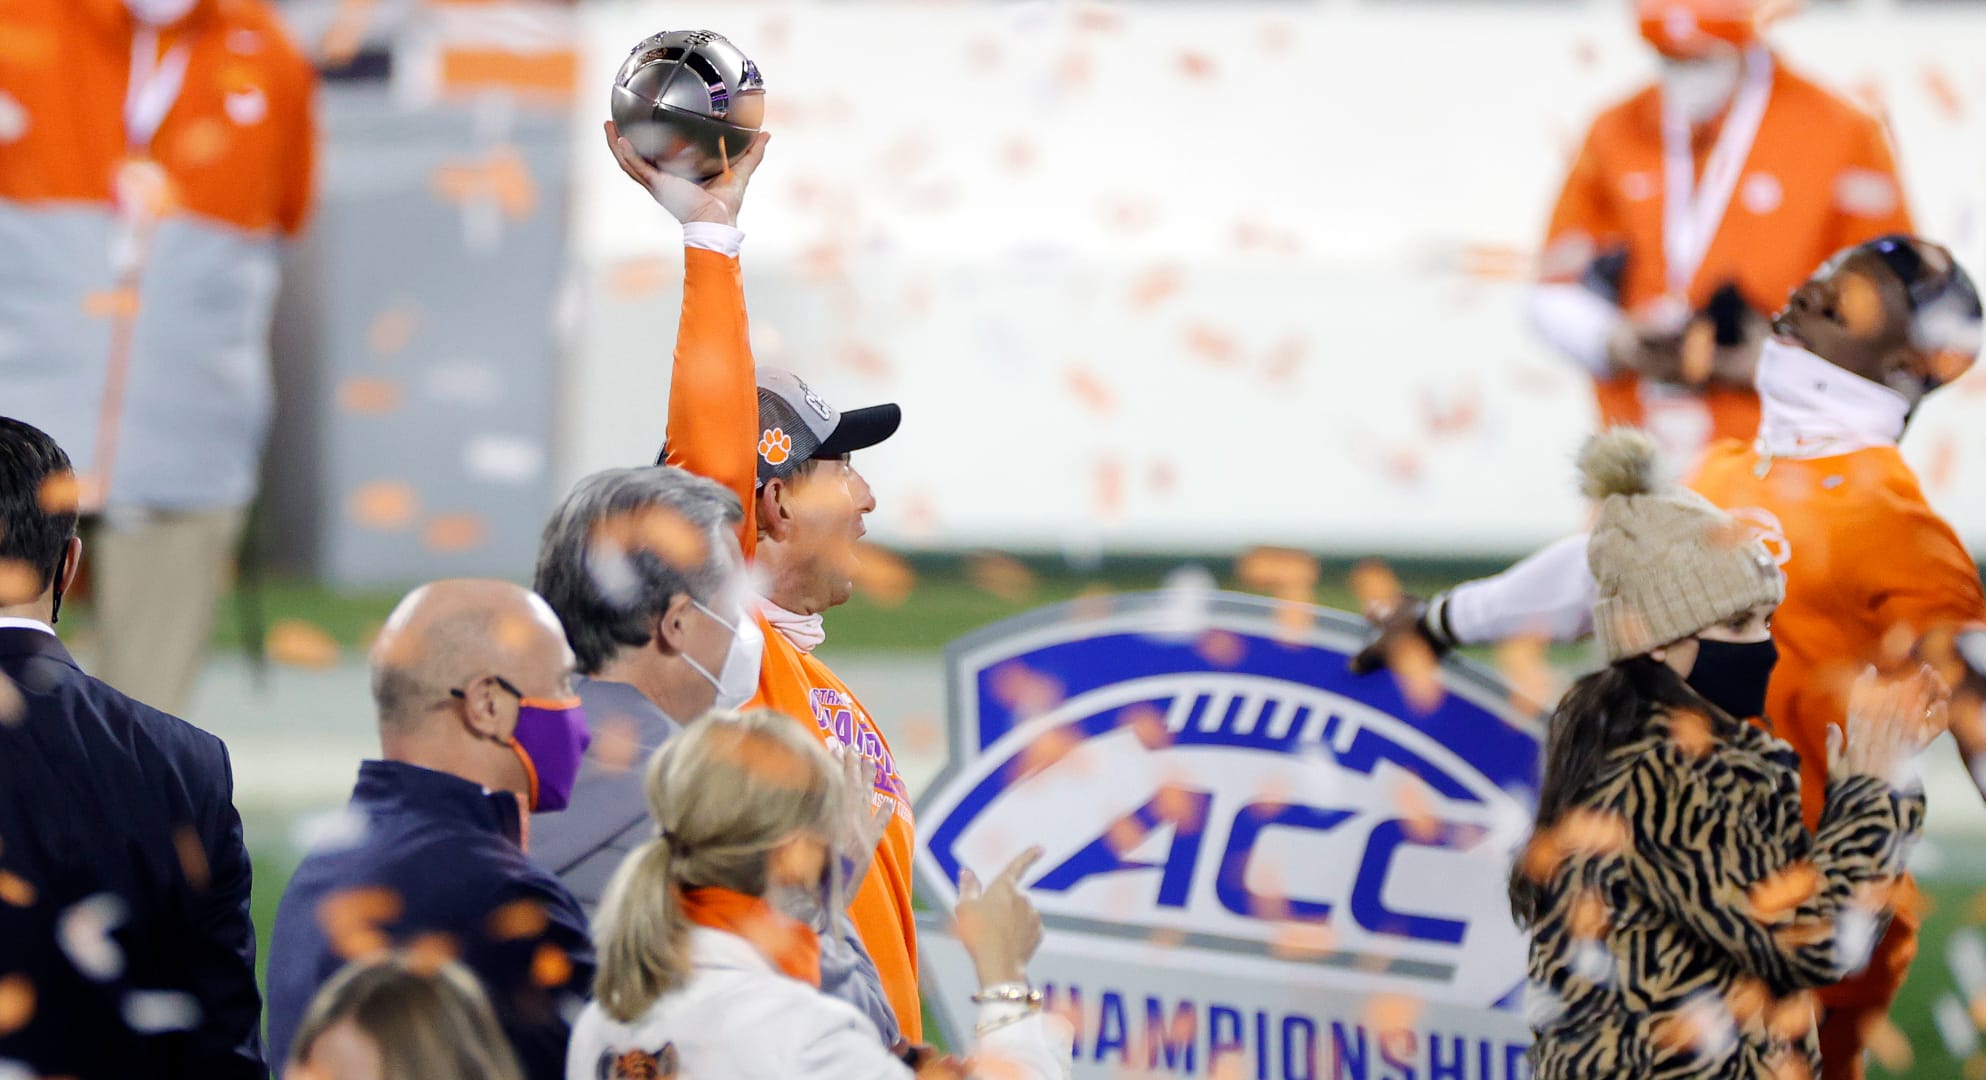 Head coach Dabo Swinney of the Clemson Tigers holds the trophy after defeating the Notre Dame Fighting Irish 34-10 in the ACC Championship game at Bank of America Stadium on December 19, 2020 in Charlotte, North Carolina. (Photo by Jared C. Tilton/Getty Images)